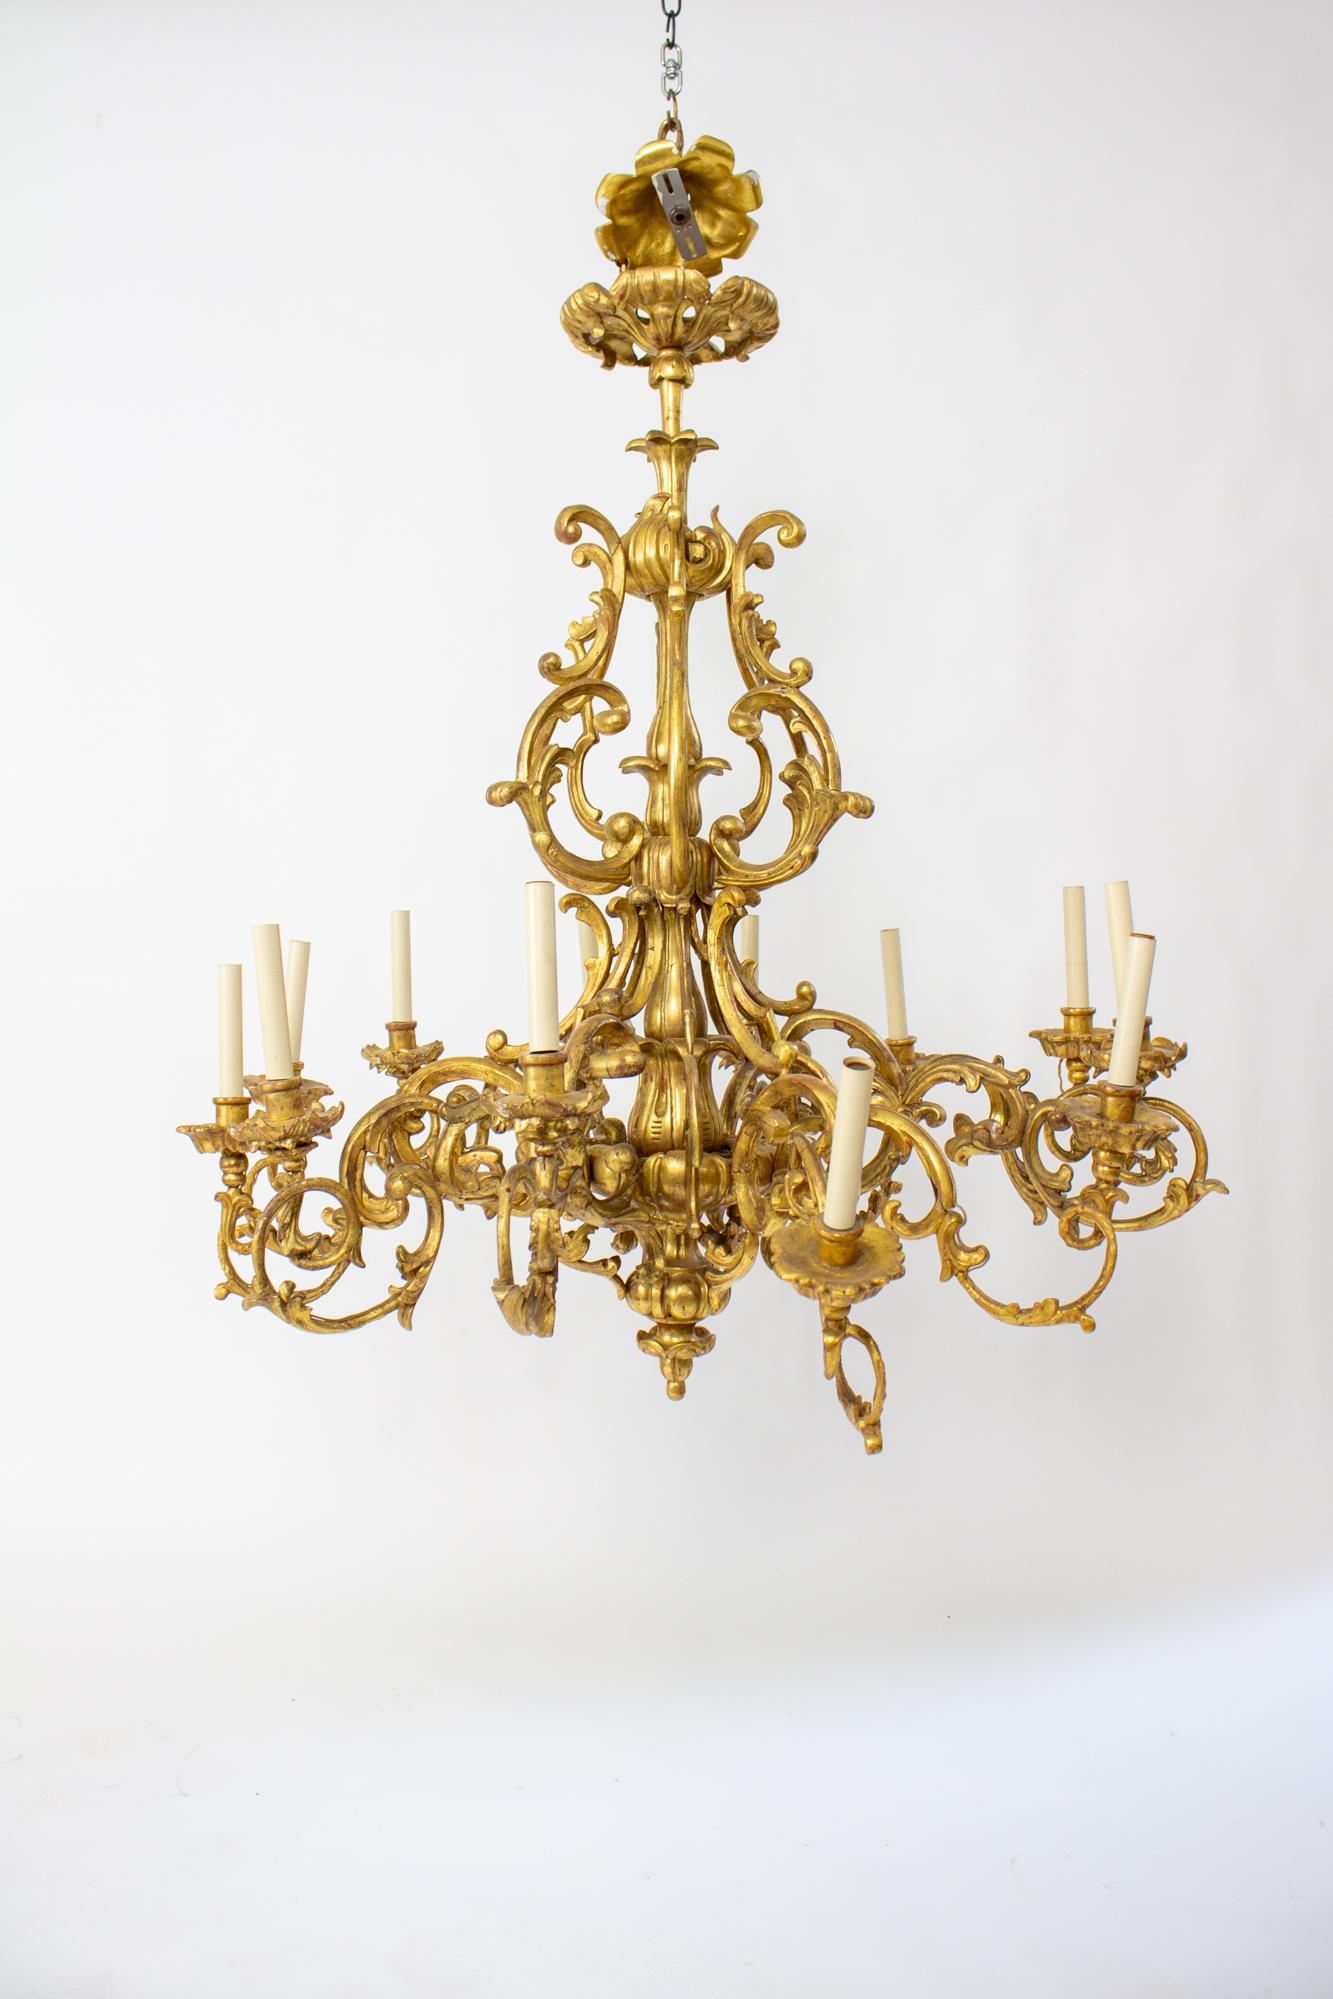 19th Century Rococo French Giltwood Chandeliers, a Pair For Sale 8